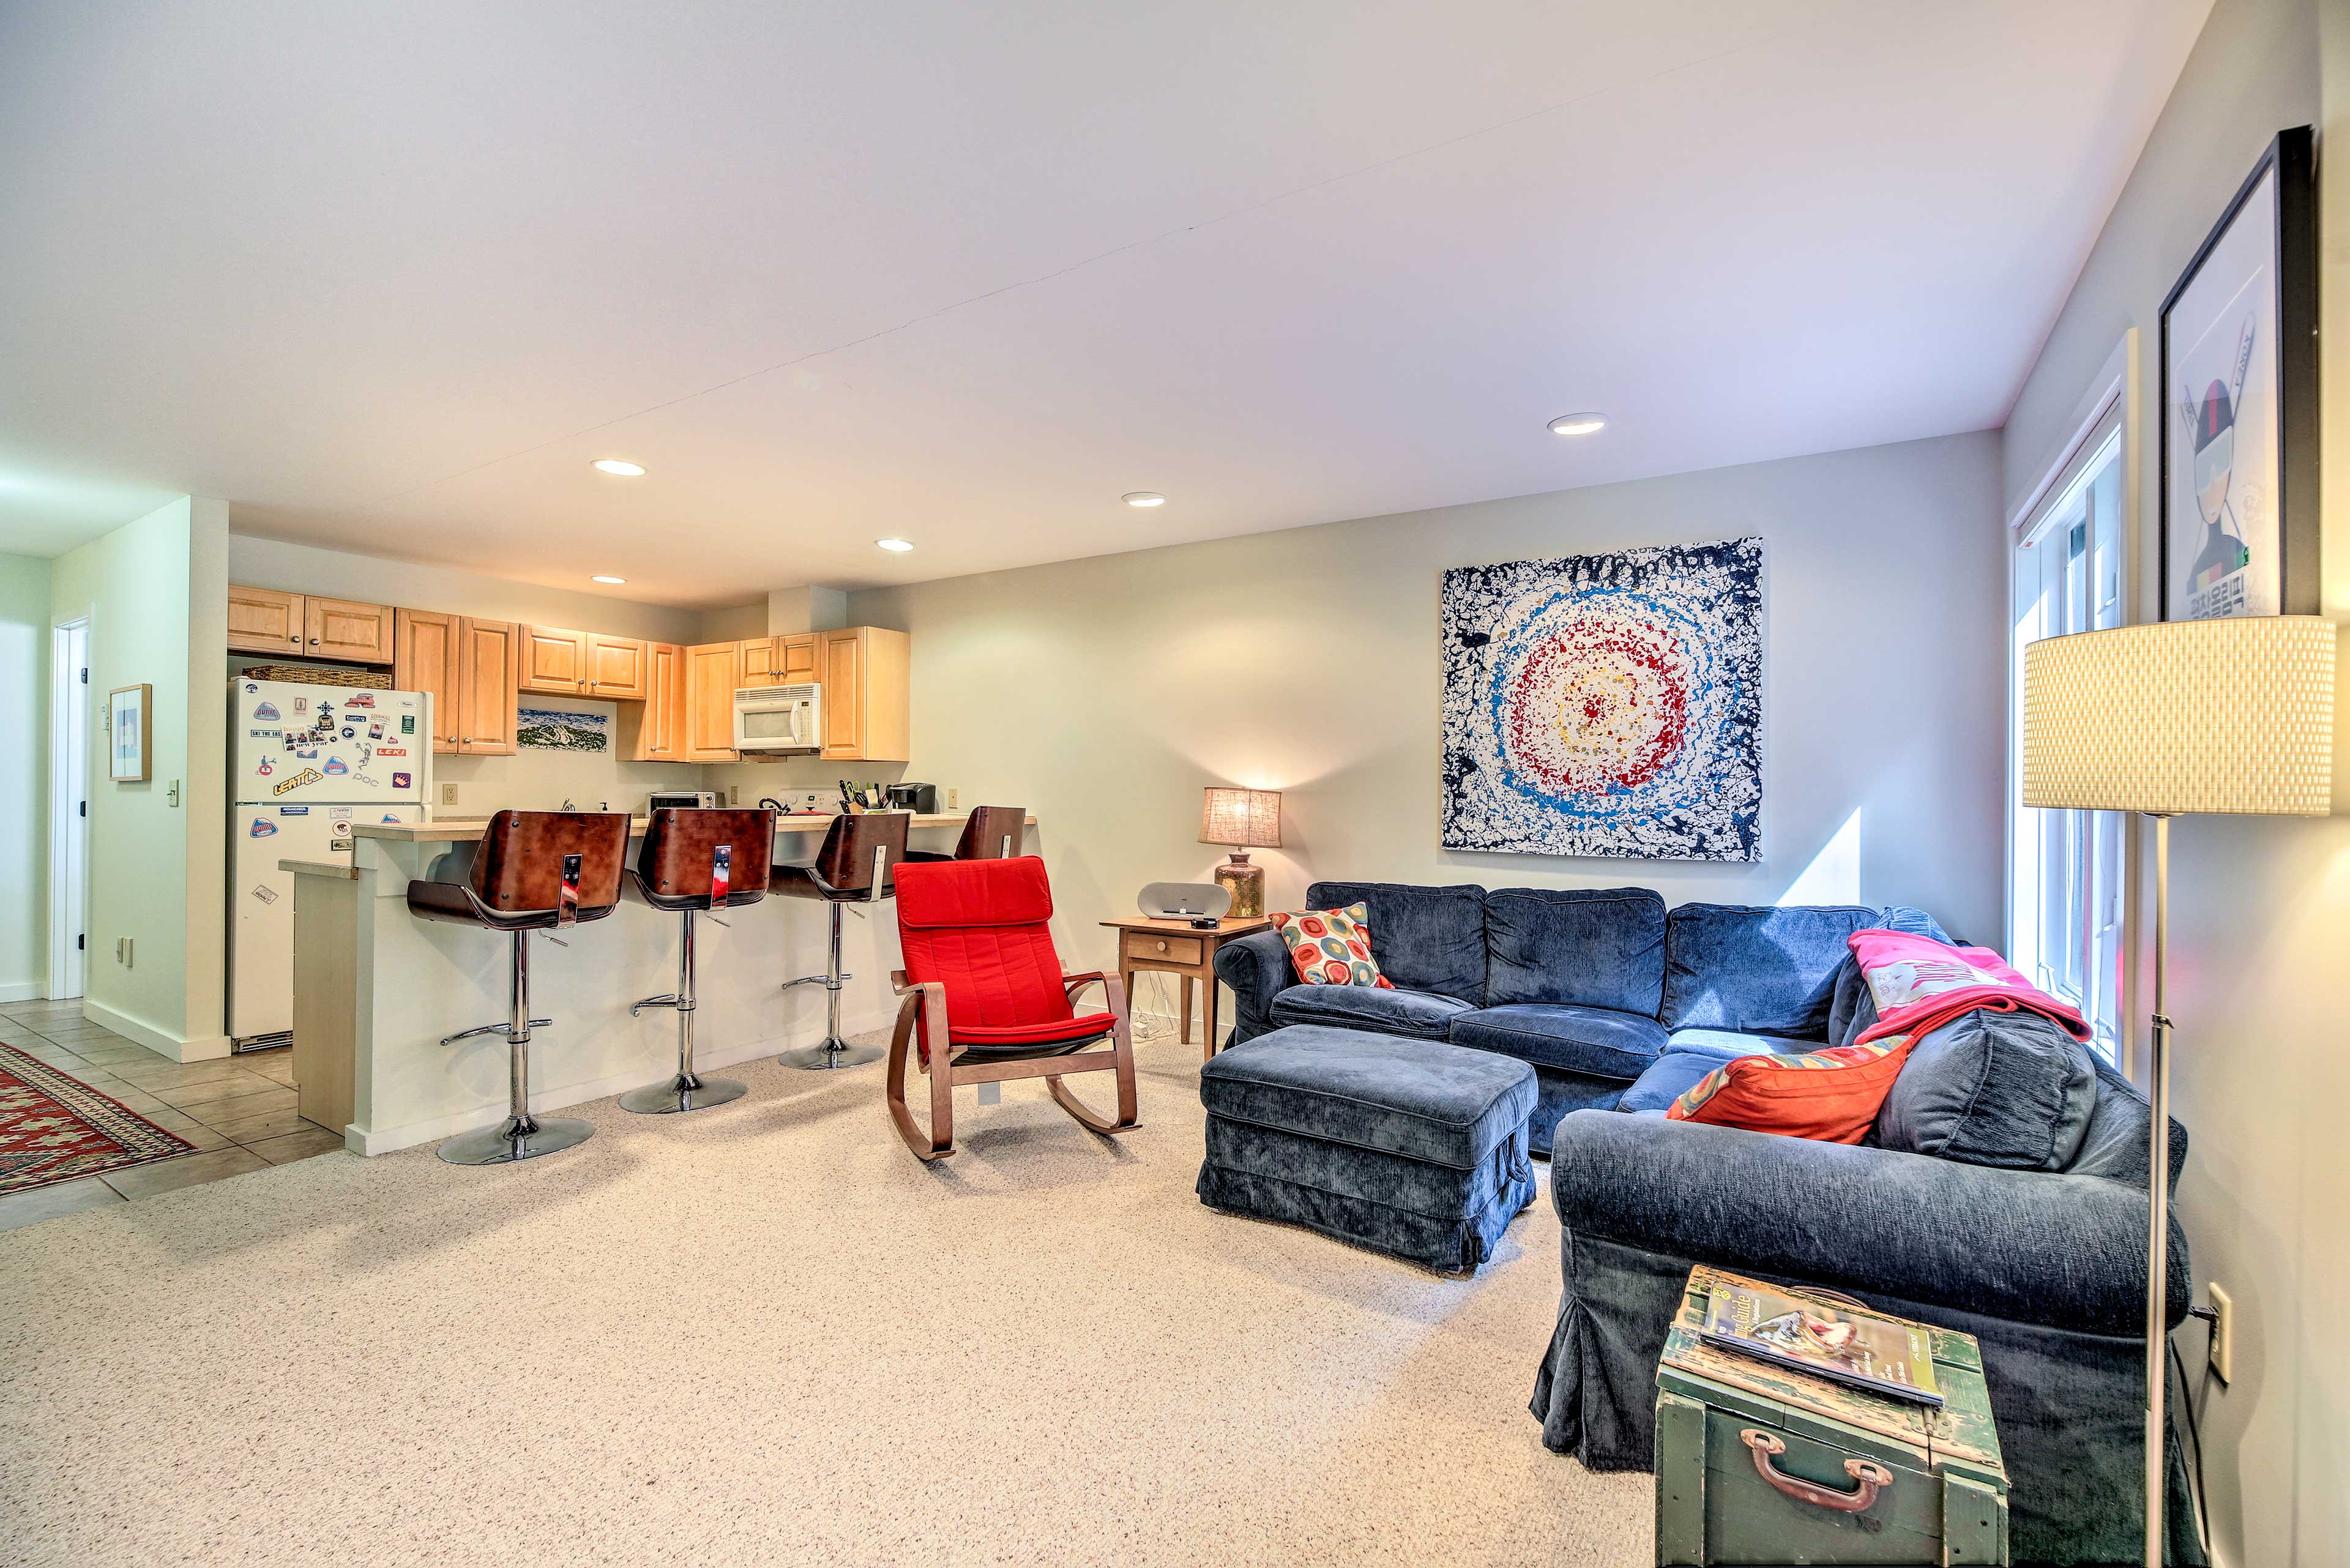 This vacation rental condo has everything you need.